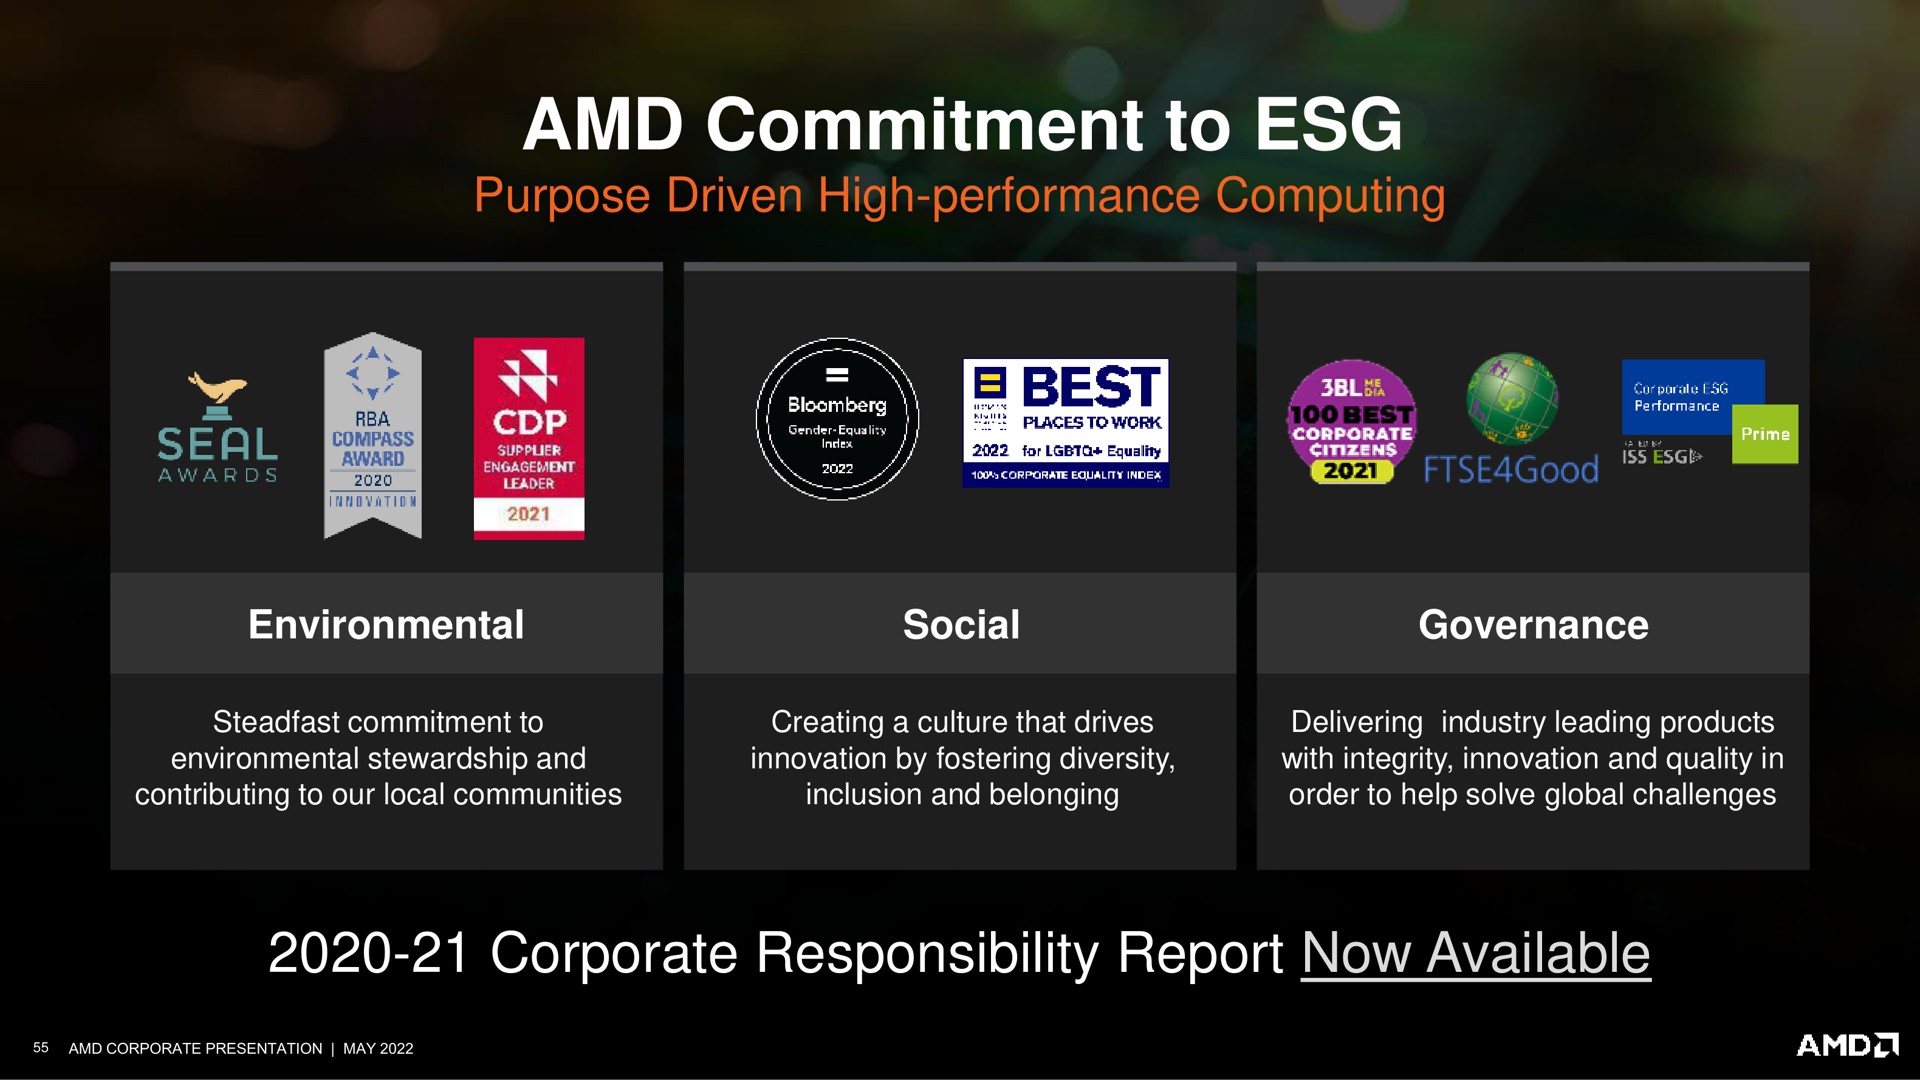 commitment to corporate responsibility report now available | AMD